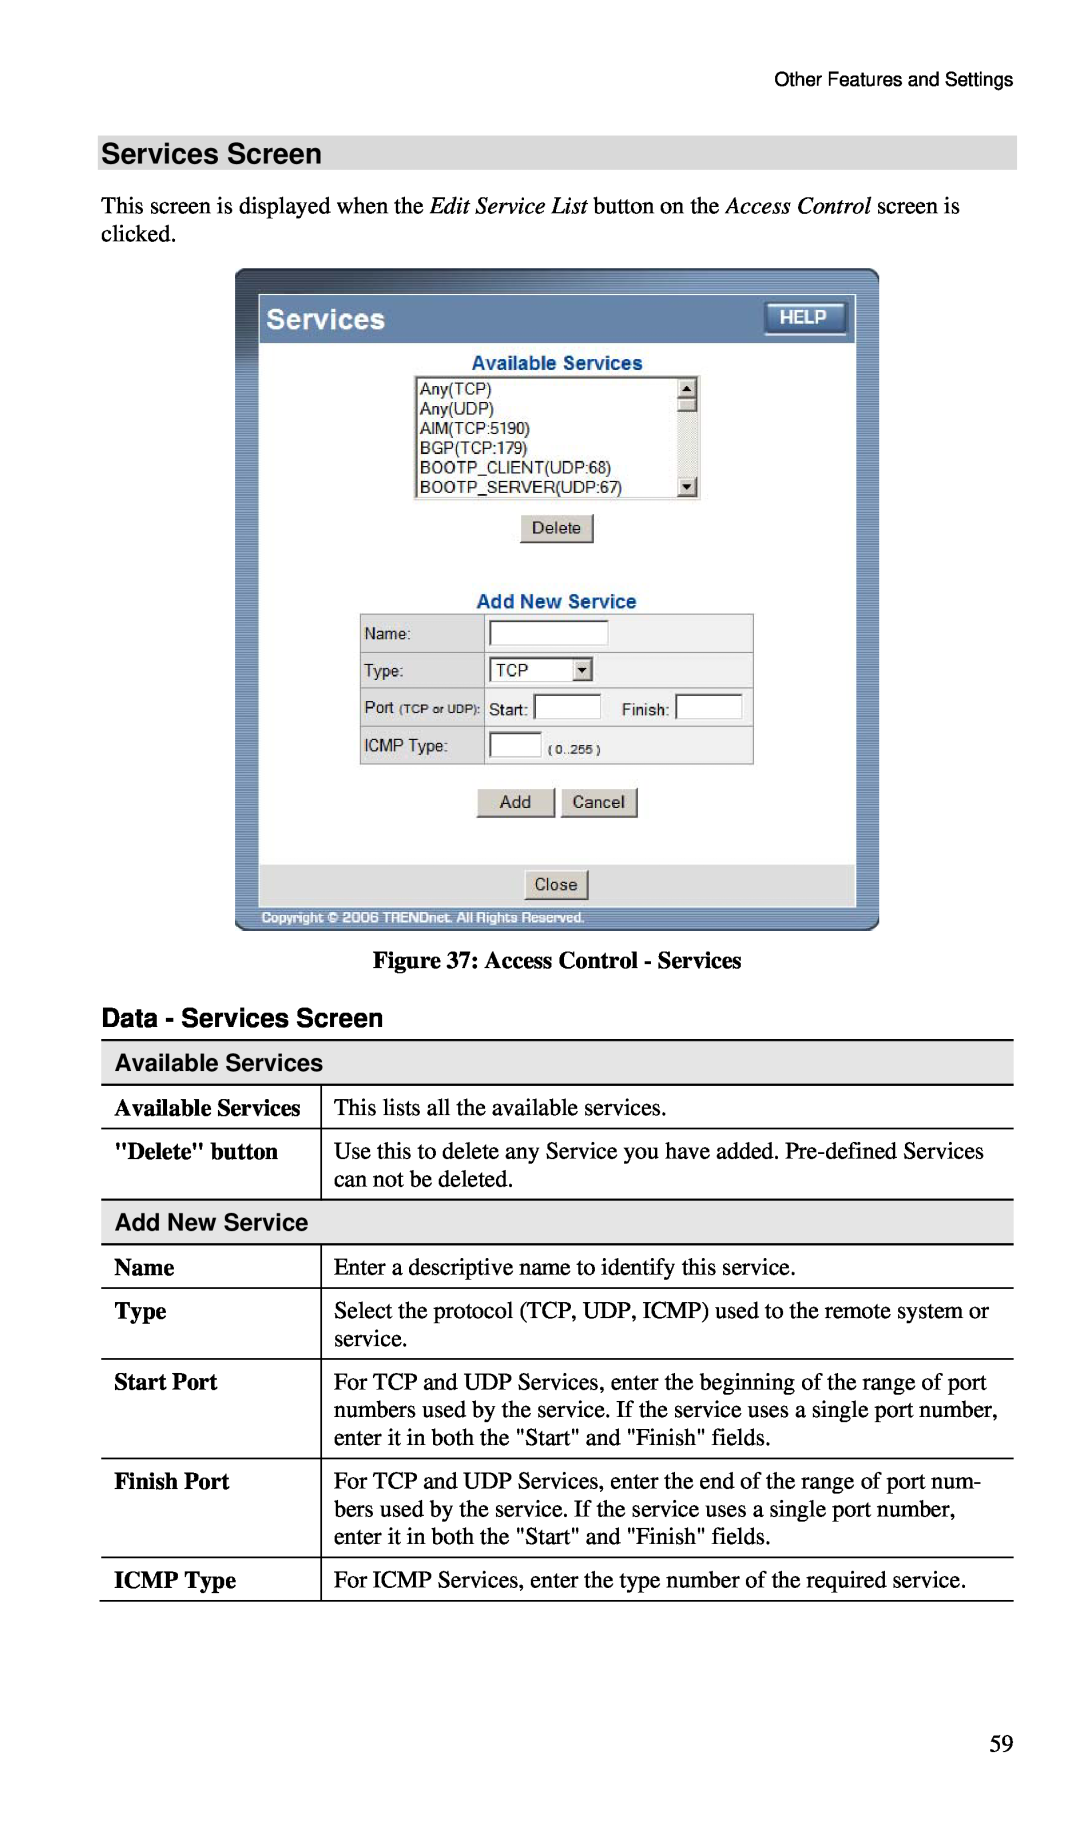 TRENDnet BRF114 Services Screen, Access Control - Services, Available Services, Delete button, Add New Service, Name, Type 